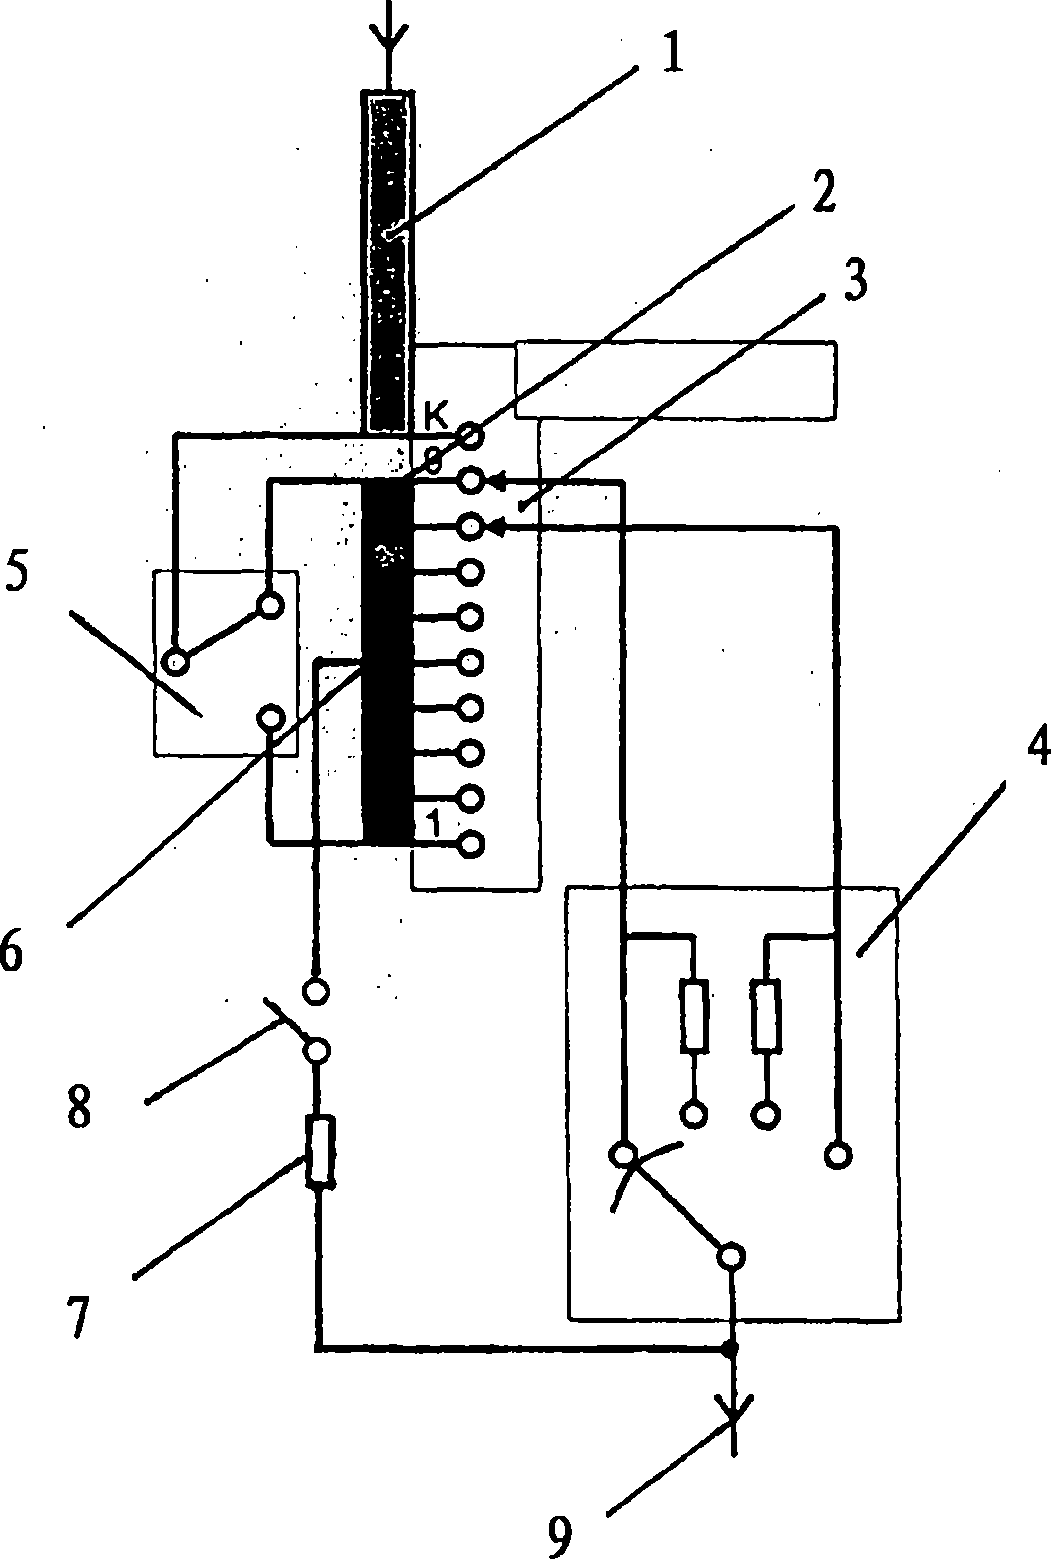 Step switch comprising a polarity switch for a variable transformer